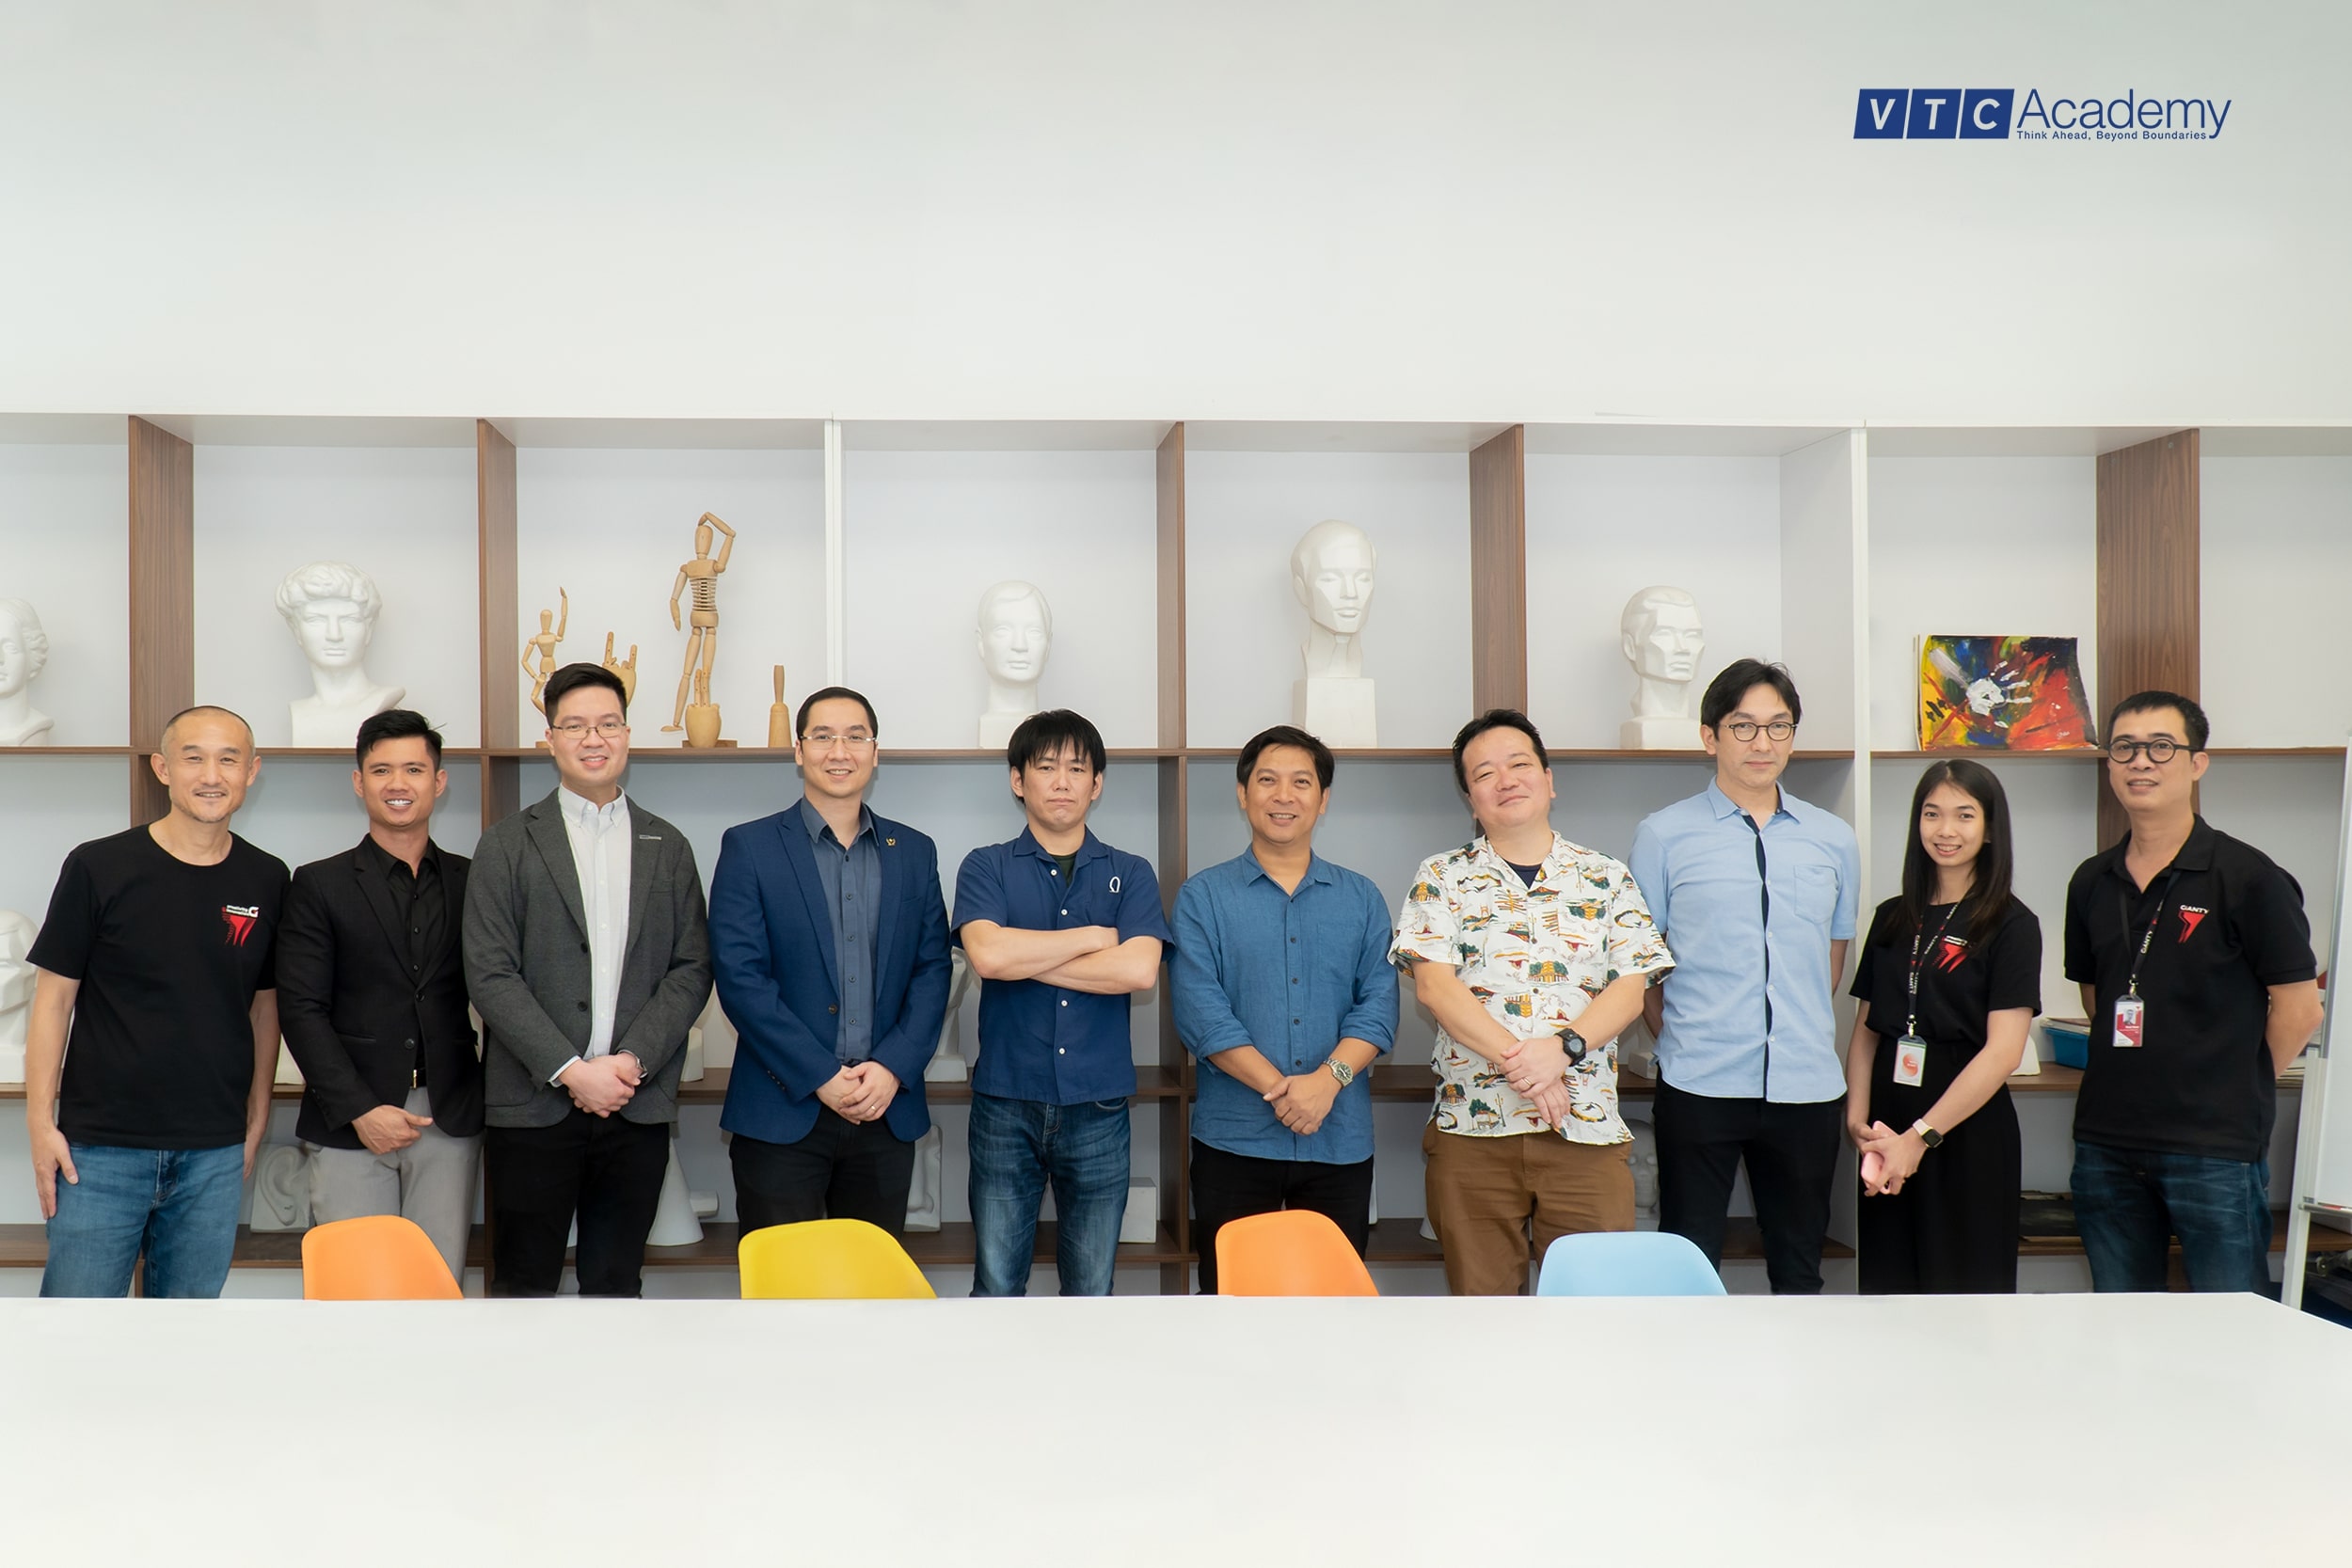 Review VTC Academy: VTC Academy is honored to welcome a delegation from the company GIANTY Vietnam for an exchange and visit